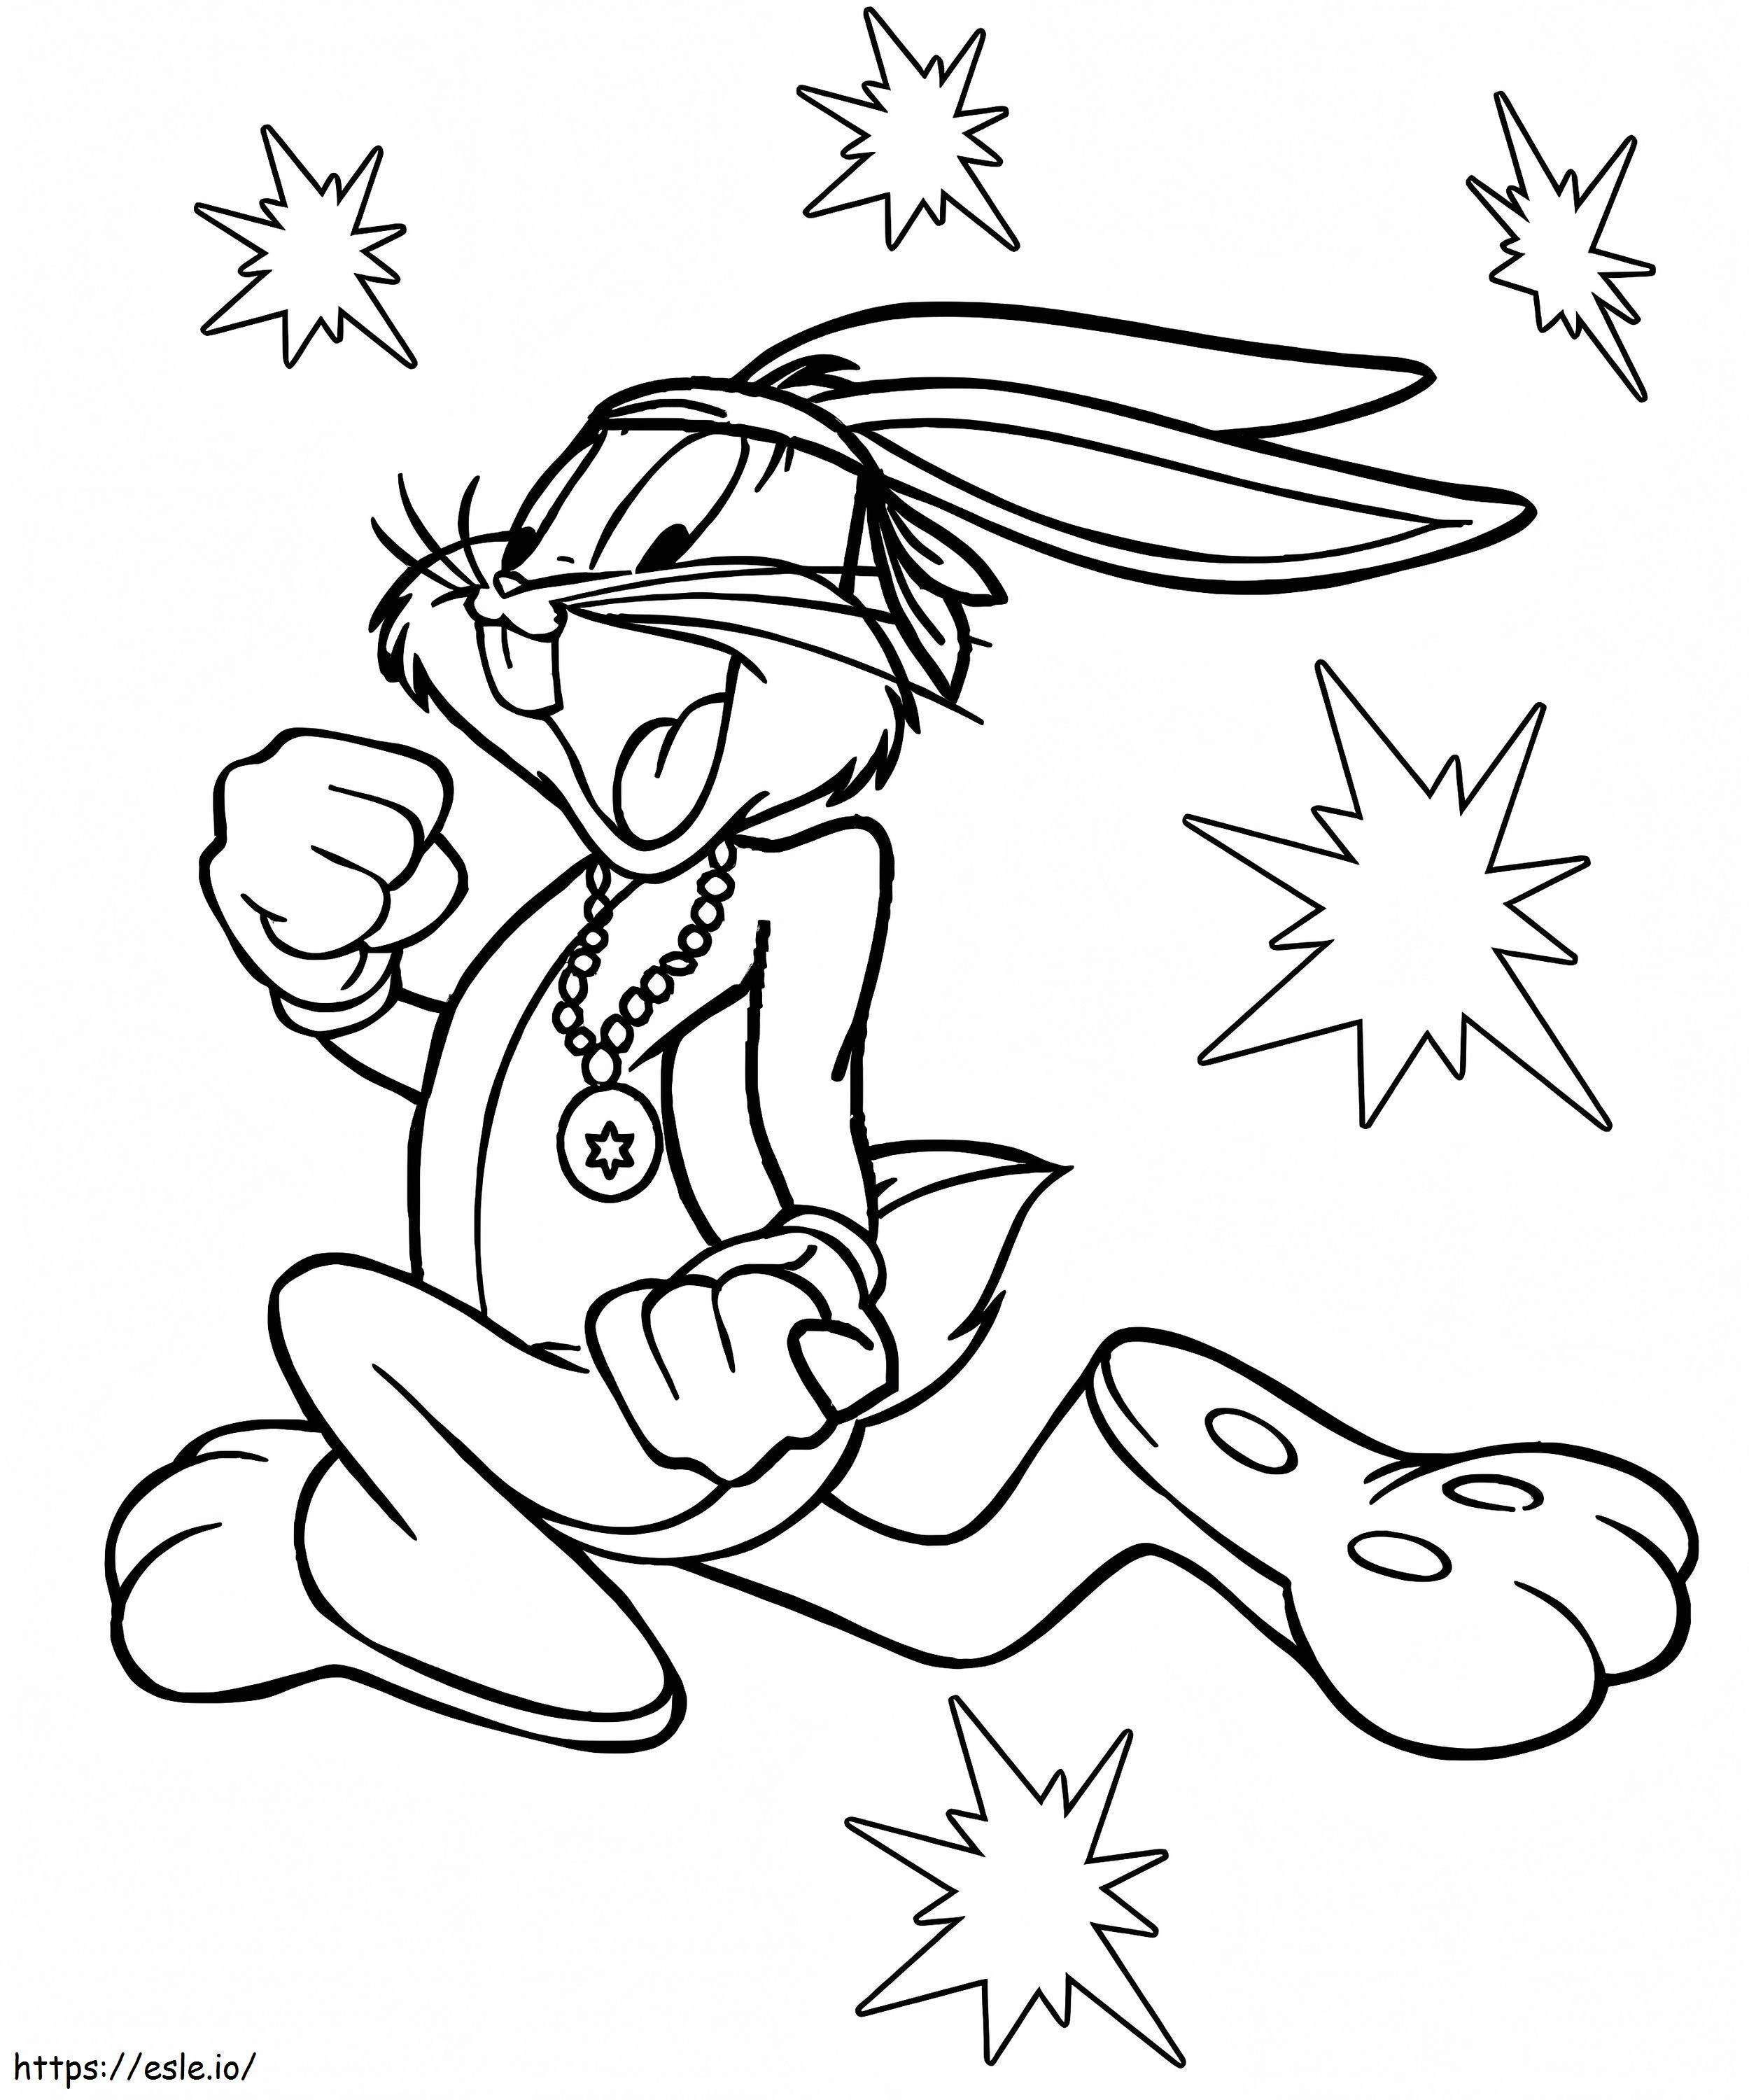 Basic Bugs Bunny coloring page